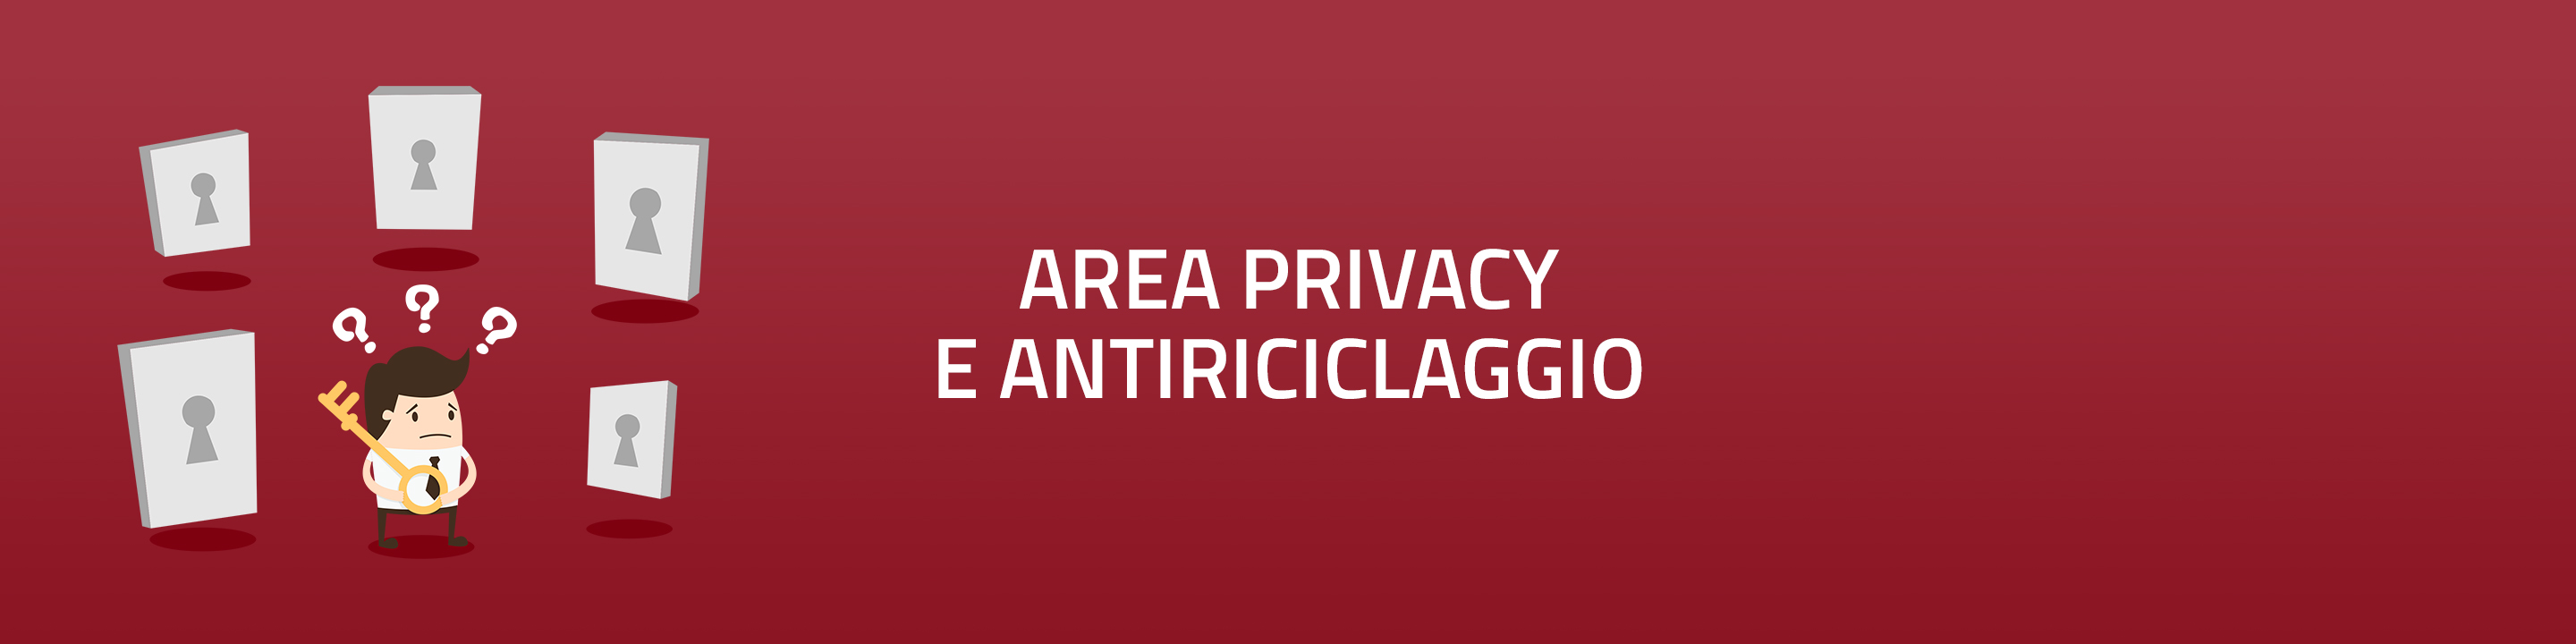 banner-area-privacy